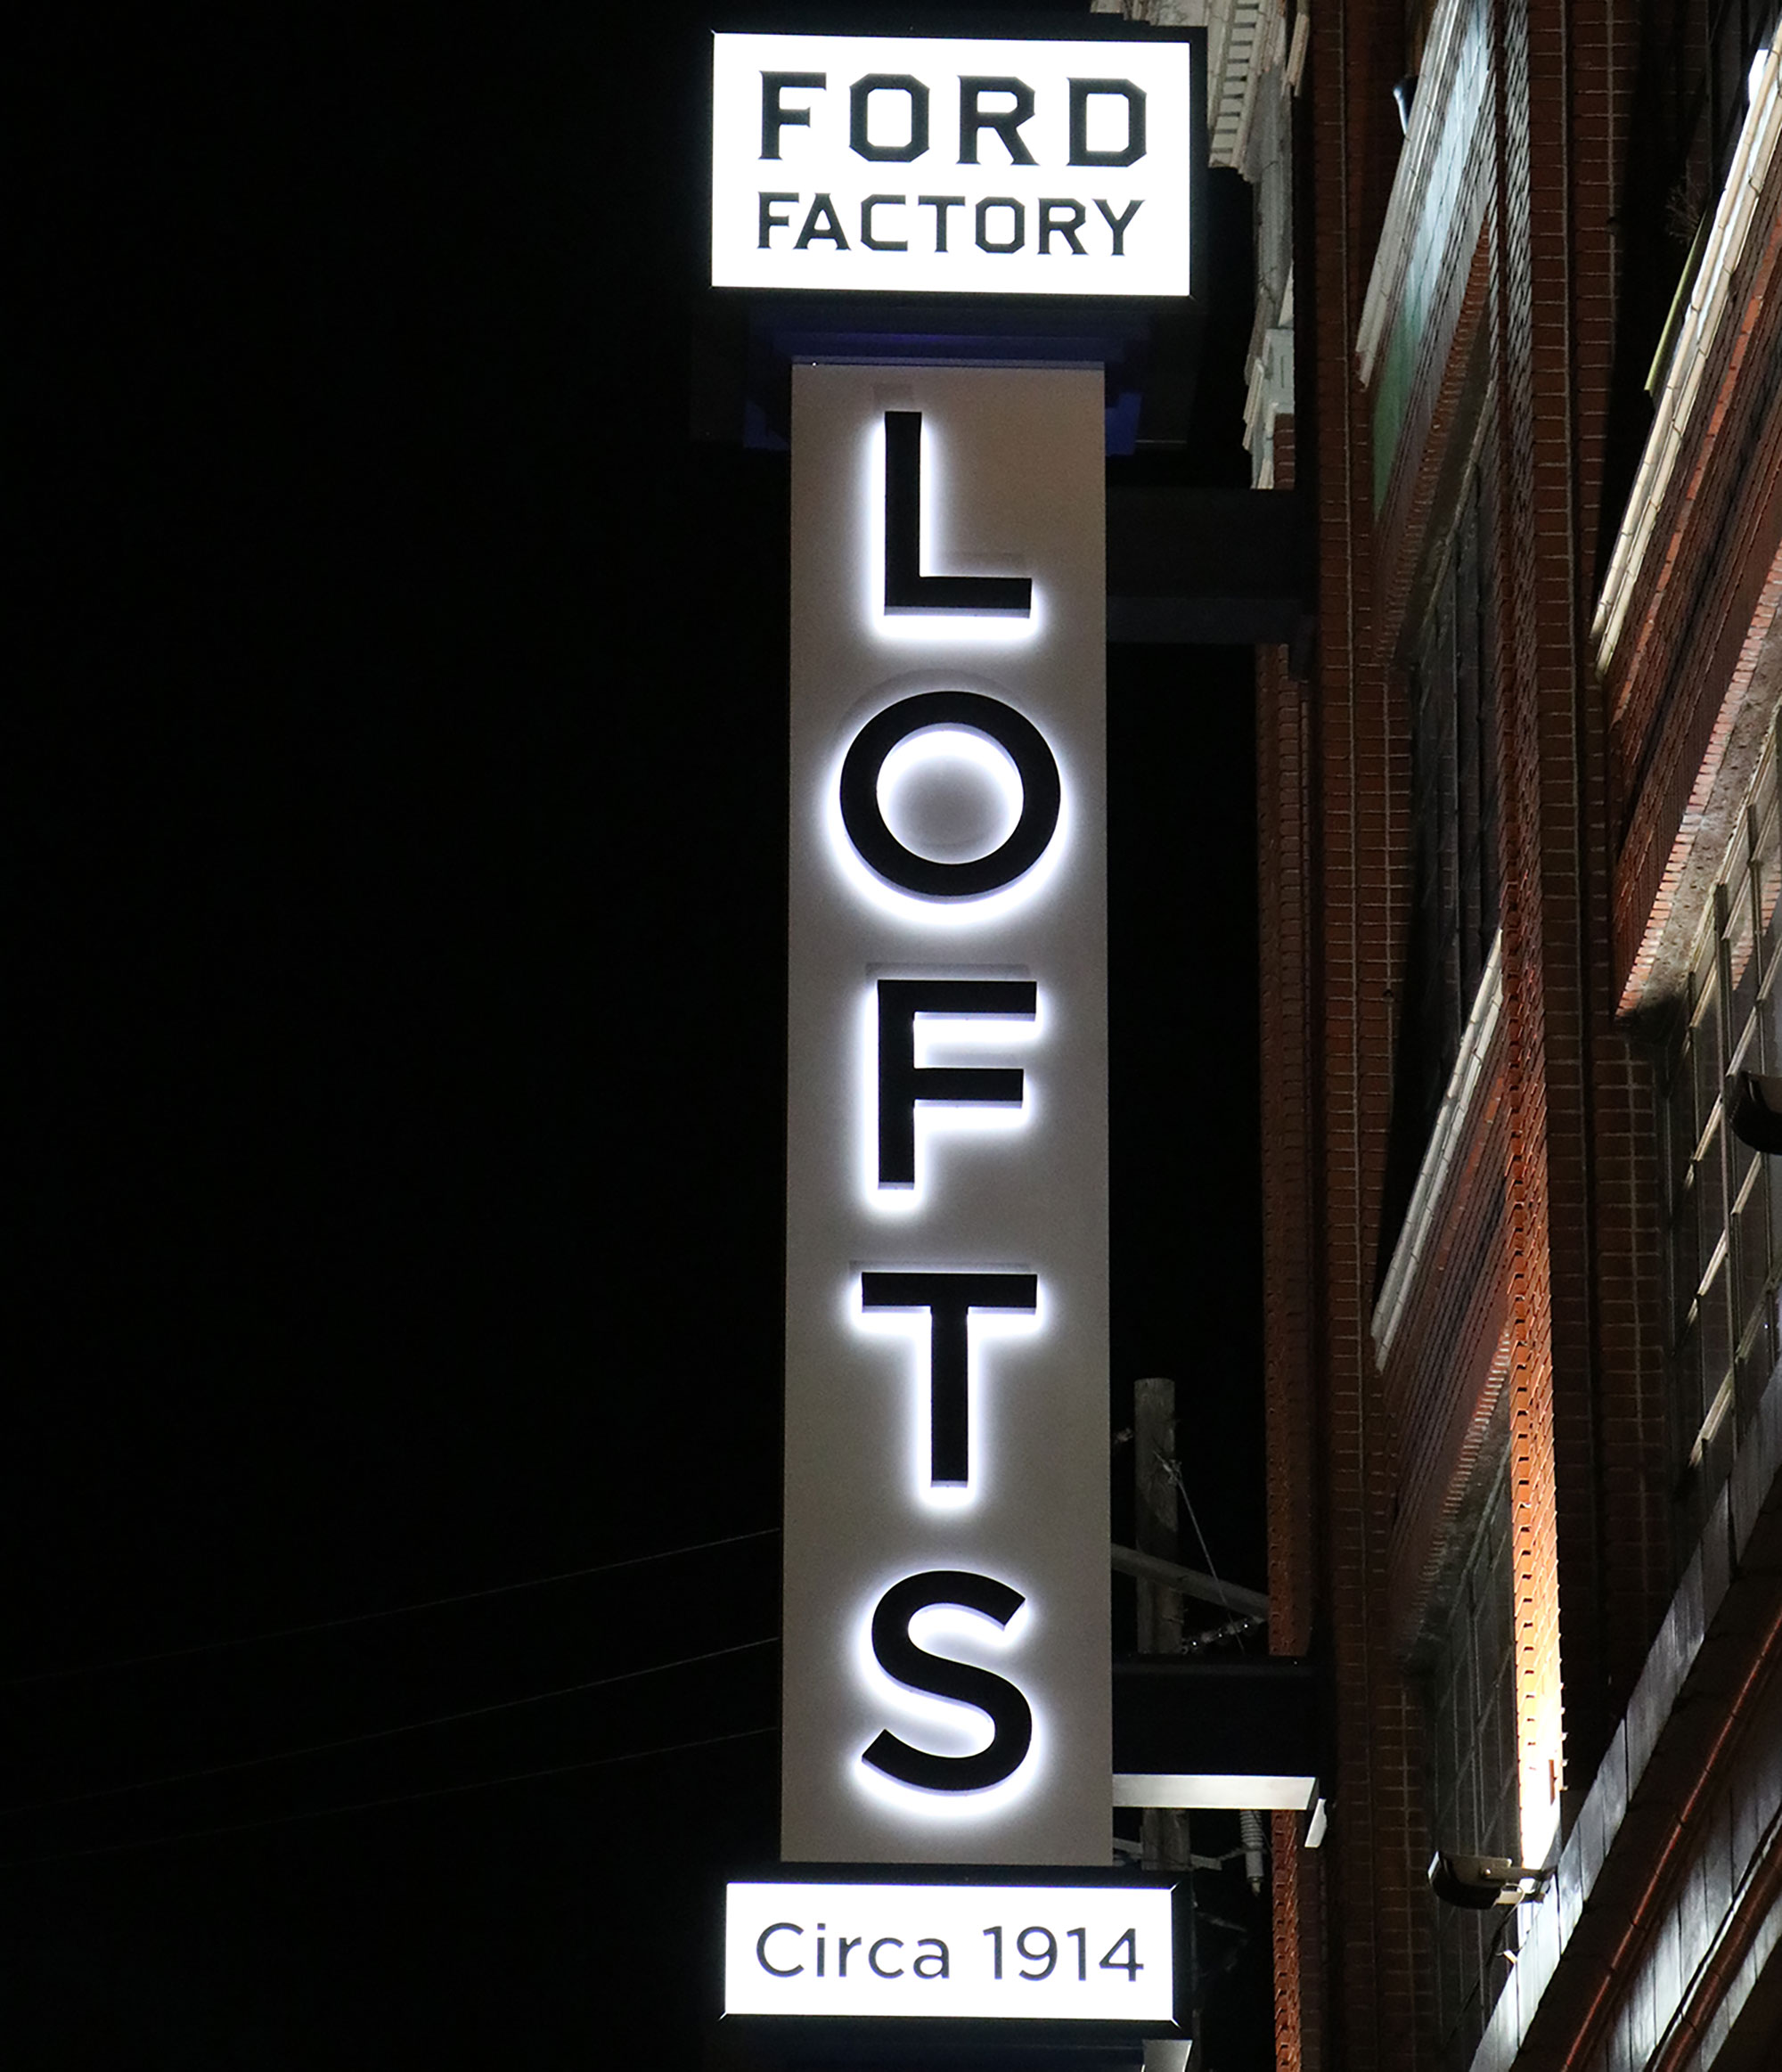 A simple vintage logo and I-beam design provide the feel of the original Ford Motor plant for these loft apartments.